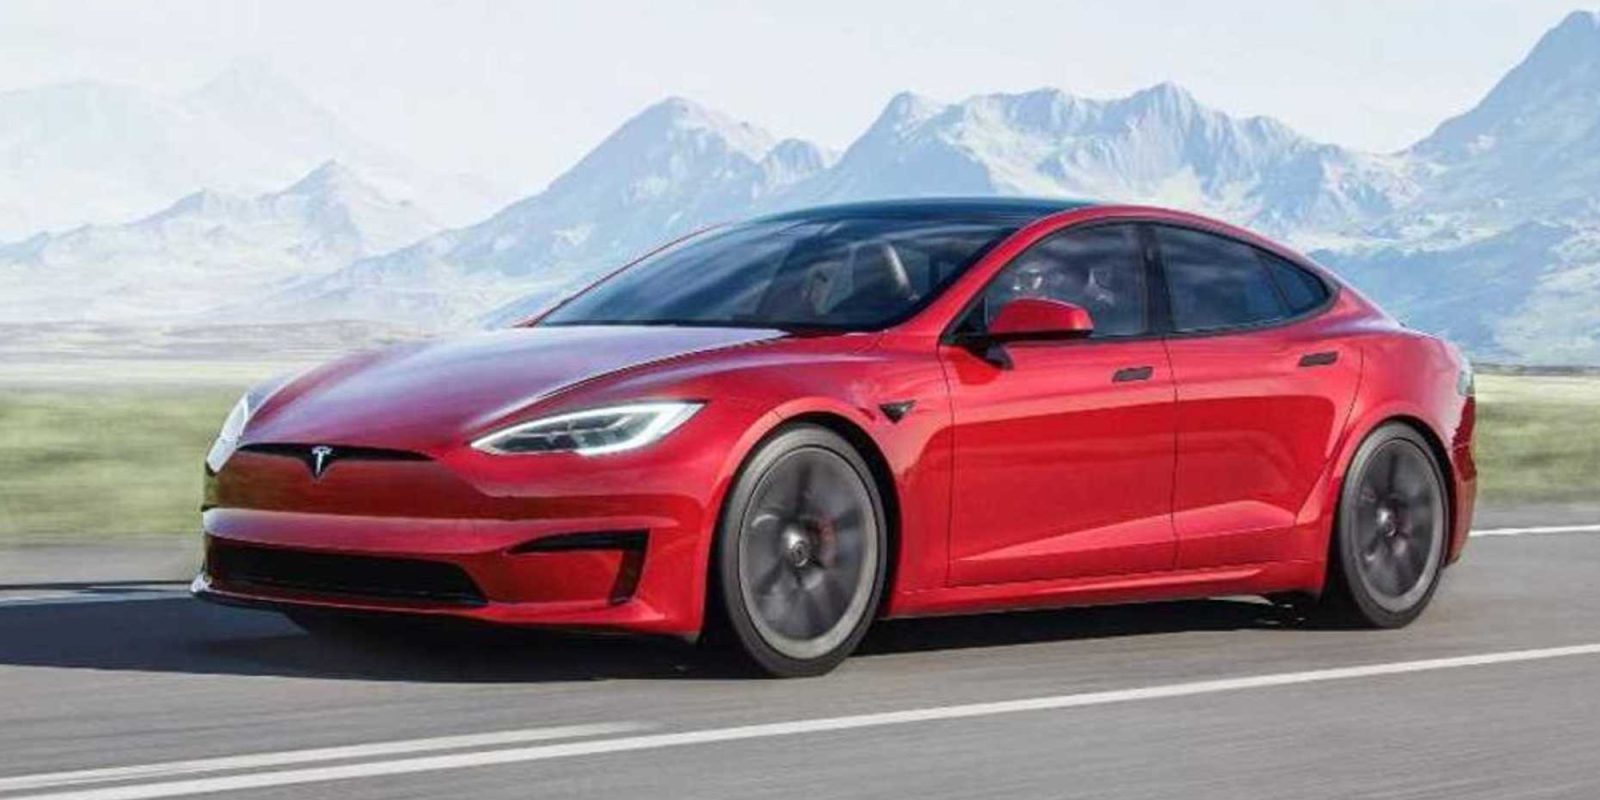 Tesla buyers are asking for better communications over messy Model S  deliveries | Electrek